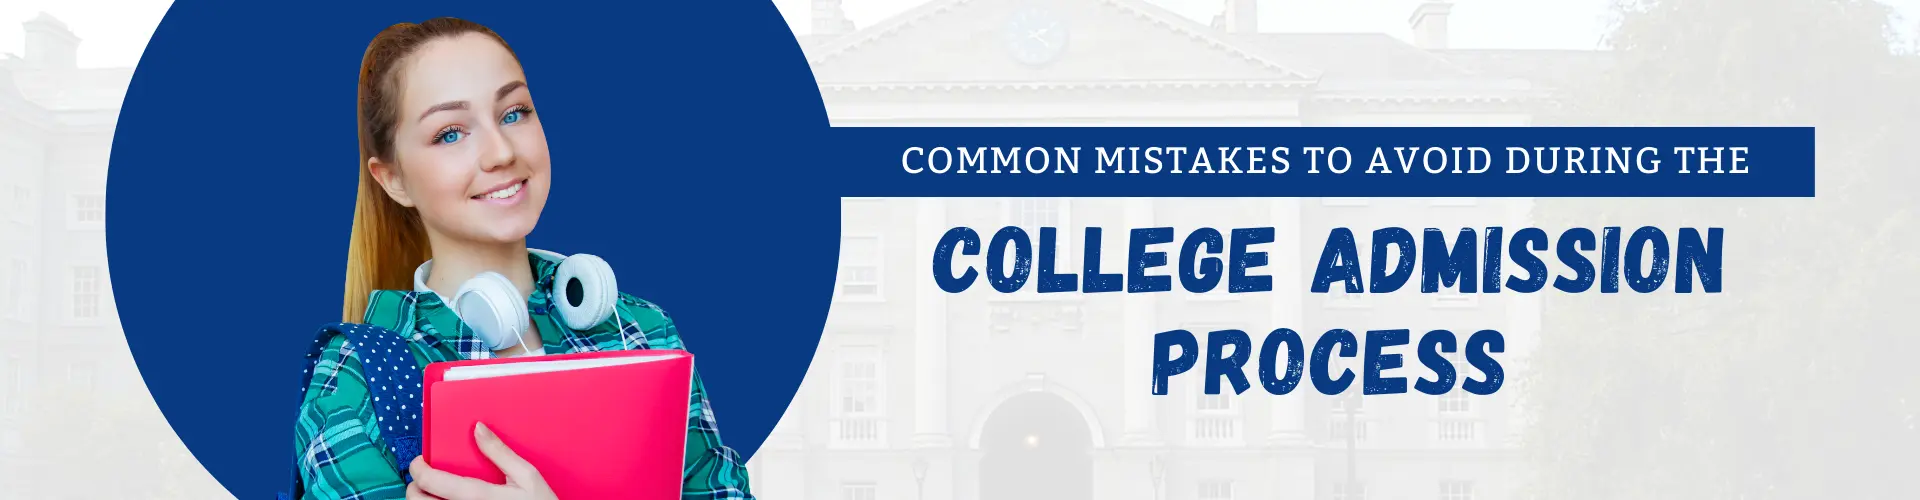 mistakes to avoid during college admission